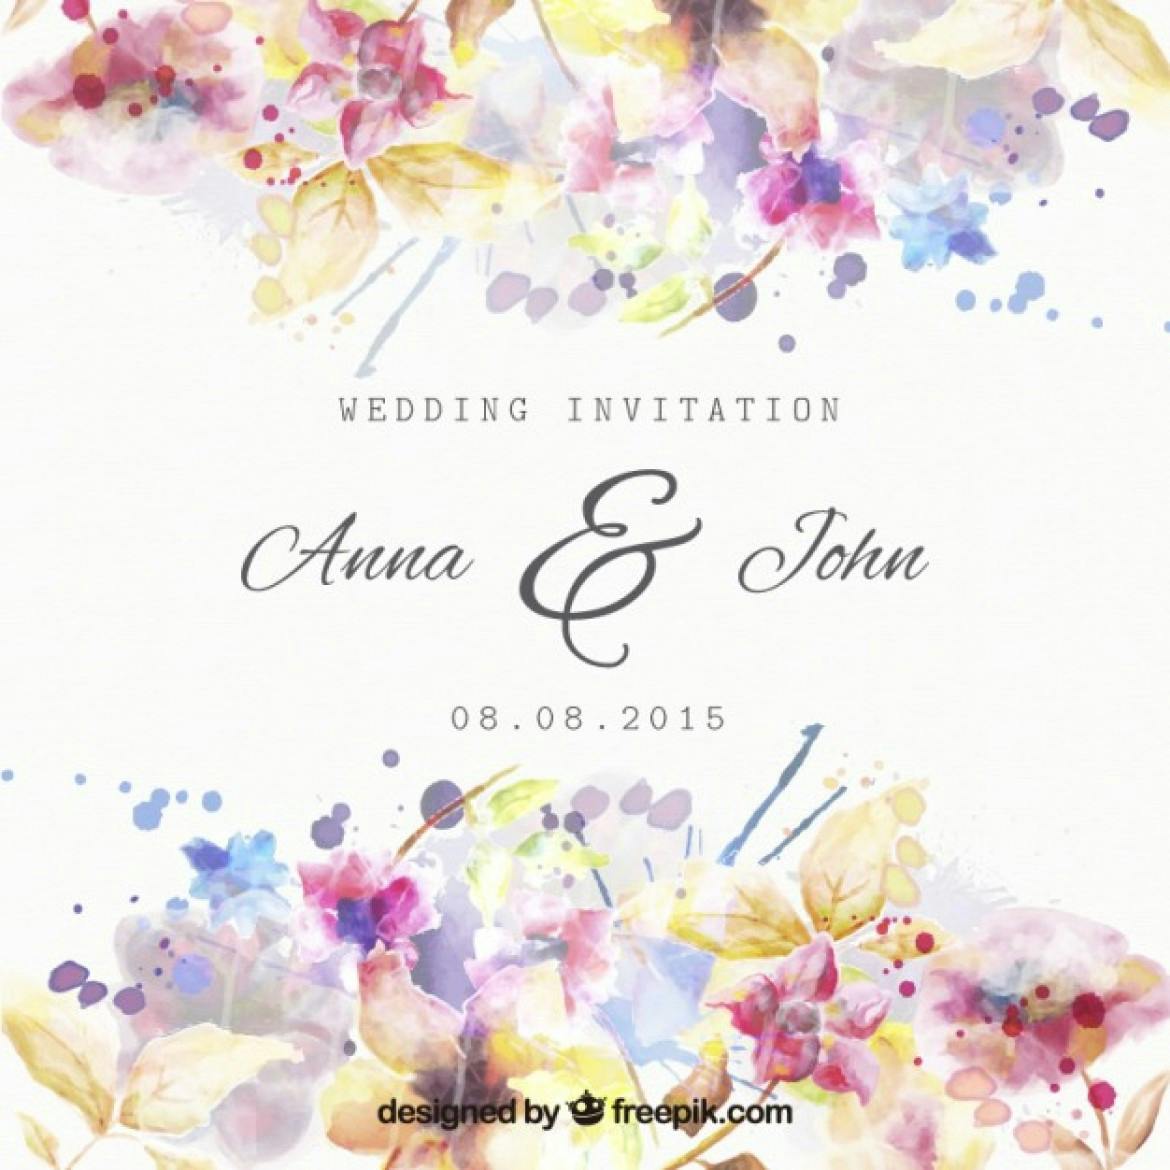 wpid-floral-wedding-invitation-in-watercolor-style_23-2147517899-1170x1170